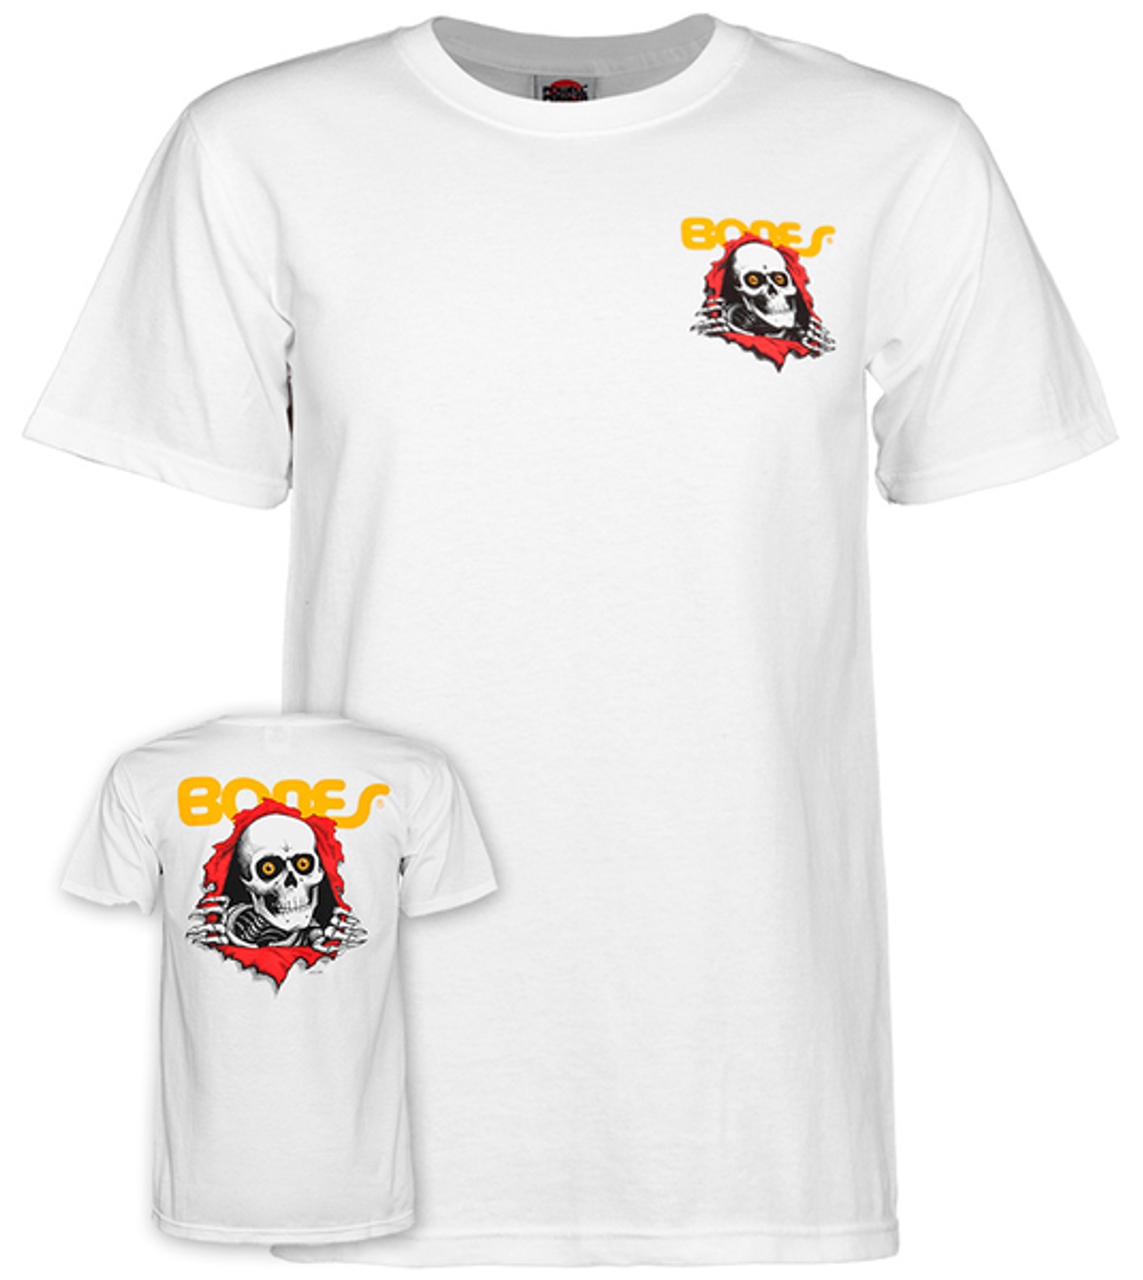 Powell Peralta Ripper Youth T-Shirt White